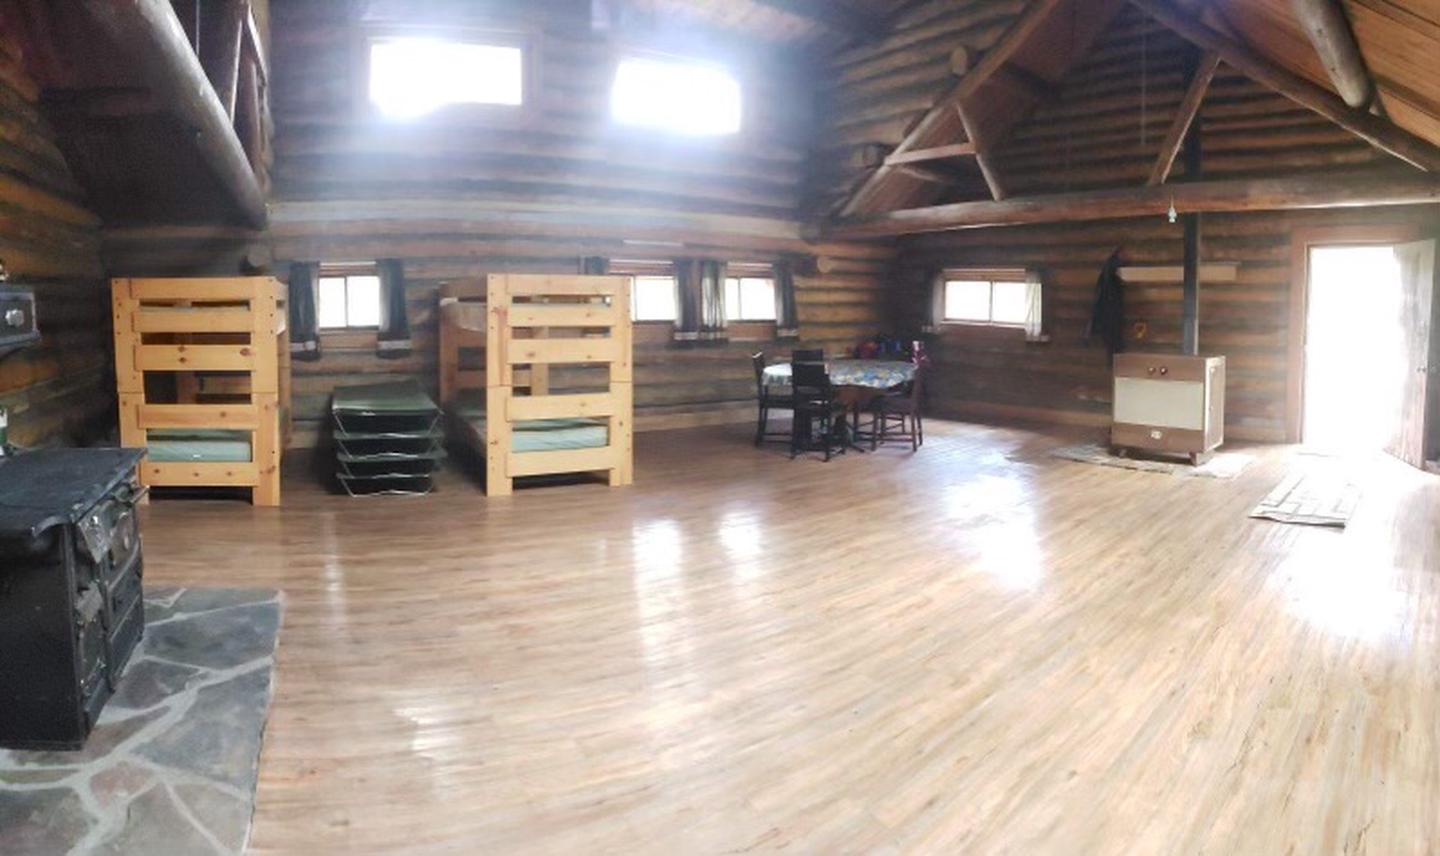 Interior of Lost Horse cabin.View of the interior of Lost Horse cabin.